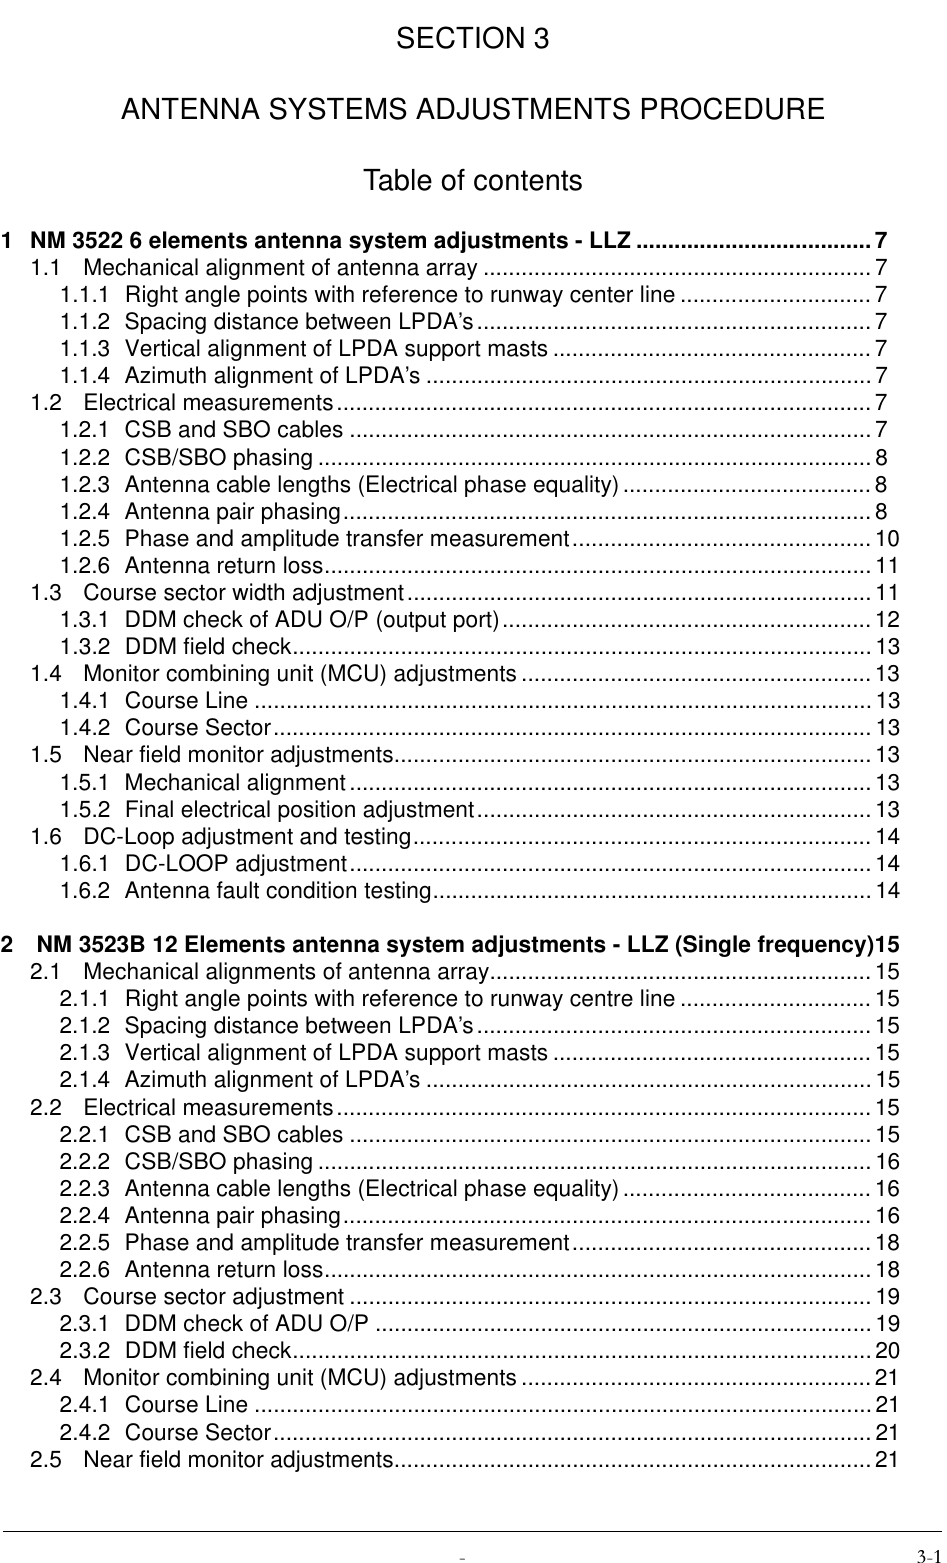  SECTION 3ANTENNA SYSTEMS ADJUSTMENTS PROCEDURETable of contents1 NM 3522 6 elements antenna system adjustments - LLZ .....................................71.1 Mechanical alignment of antenna array .............................................................71.1.1 Right angle points with reference to runway center line .............................. 71.1.2 Spacing distance between LPDA’s..............................................................71.1.3 Vertical alignment of LPDA support masts ..................................................71.1.4 Azimuth alignment of LPDA’s ......................................................................71.2 Electrical measurements....................................................................................71.2.1 CSB and SBO cables ..................................................................................71.2.2 CSB/SBO phasing .......................................................................................81.2.3 Antenna cable lengths (Electrical phase equality).......................................81.2.4 Antenna pair phasing................................................................................... 81.2.5 Phase and amplitude transfer measurement............................................... 101.2.6 Antenna return loss......................................................................................111.3 Course sector width adjustment......................................................................... 111.3.1 DDM check of ADU O/P (output port)..........................................................121.3.2 DDM field check...........................................................................................131.4 Monitor combining unit (MCU) adjustments ....................................................... 131.4.1 Course Line ................................................................................................. 131.4.2 Course Sector.............................................................................................. 131.5 Near field monitor adjustments...........................................................................131.5.1 Mechanical alignment ..................................................................................131.5.2 Final electrical position adjustment.............................................................. 131.6 DC-Loop adjustment and testing........................................................................141.6.1 DC-LOOP adjustment.................................................................................. 141.6.2 Antenna fault condition testing.....................................................................142  NM 3523B 12 Elements antenna system adjustments - LLZ (Single frequency)152.1 Mechanical alignments of antenna array............................................................152.1.1 Right angle points with reference to runway centre line .............................. 152.1.2 Spacing distance between LPDA’s..............................................................152.1.3 Vertical alignment of LPDA support masts ..................................................152.1.4 Azimuth alignment of LPDA’s ......................................................................152.2 Electrical measurements....................................................................................152.2.1 CSB and SBO cables ..................................................................................152.2.2 CSB/SBO phasing .......................................................................................162.2.3 Antenna cable lengths (Electrical phase equality).......................................162.2.4 Antenna pair phasing................................................................................... 162.2.5 Phase and amplitude transfer measurement............................................... 182.2.6 Antenna return loss......................................................................................182.3 Course sector adjustment ..................................................................................192.3.1 DDM check of ADU O/P ..............................................................................192.3.2 DDM field check...........................................................................................202.4 Monitor combining unit (MCU) adjustments ....................................................... 212.4.1 Course Line ................................................................................................. 212.4.2 Course Sector.............................................................................................. 212.5 Near field monitor adjustments...........................................................................21